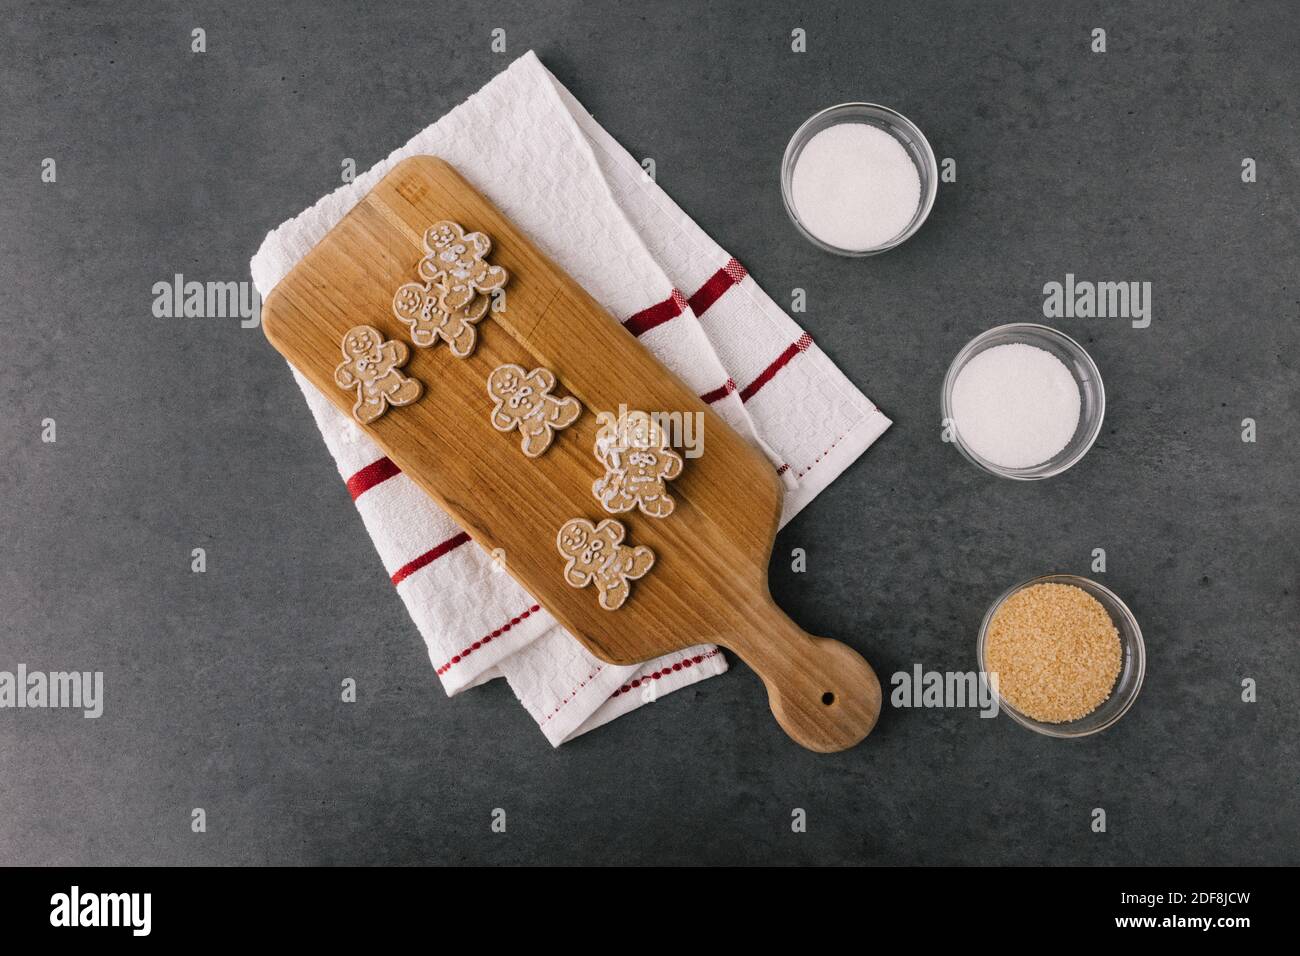 Christmas Gingerbread Man Cookies on Wooden Board With Ingredients On Dark Slate Texture Stock Photo